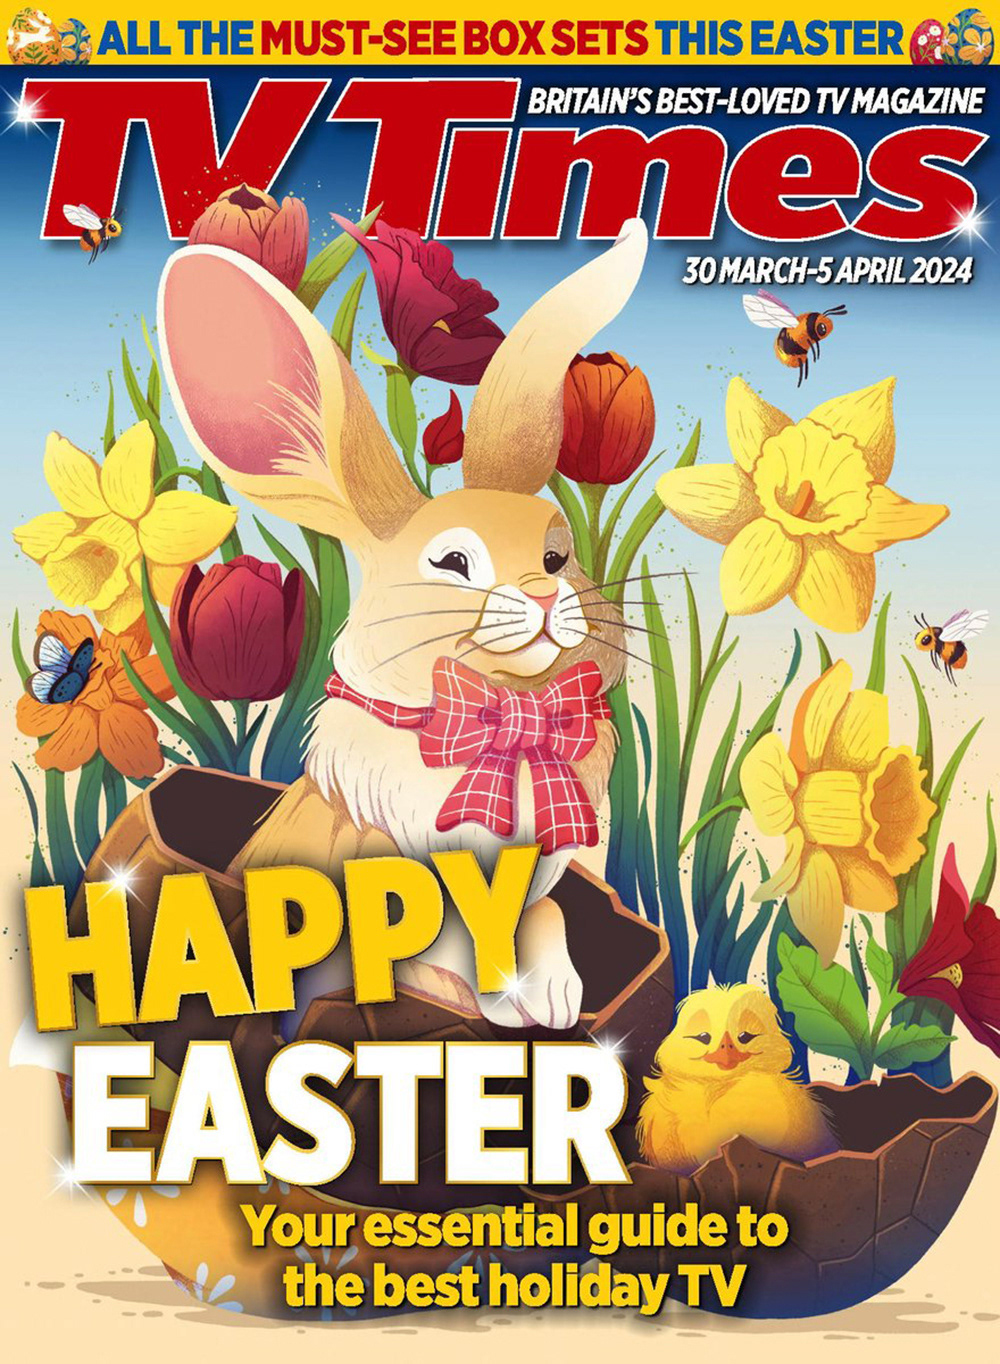 Easter bunny editorial characters Magazine Cover cute